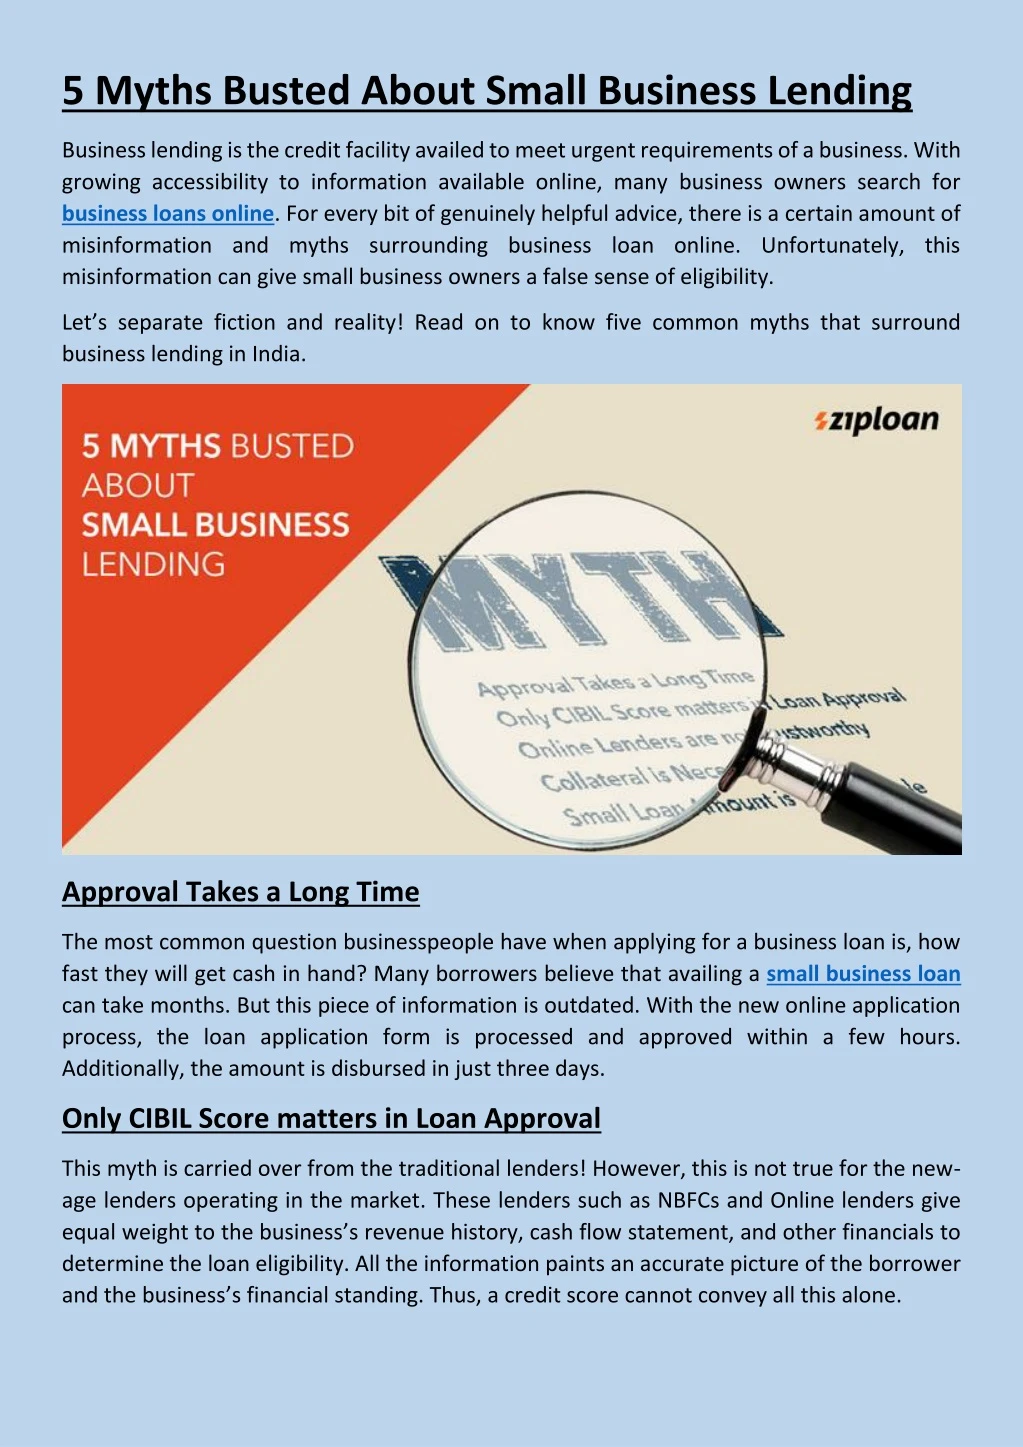 5 myths busted about small business lending